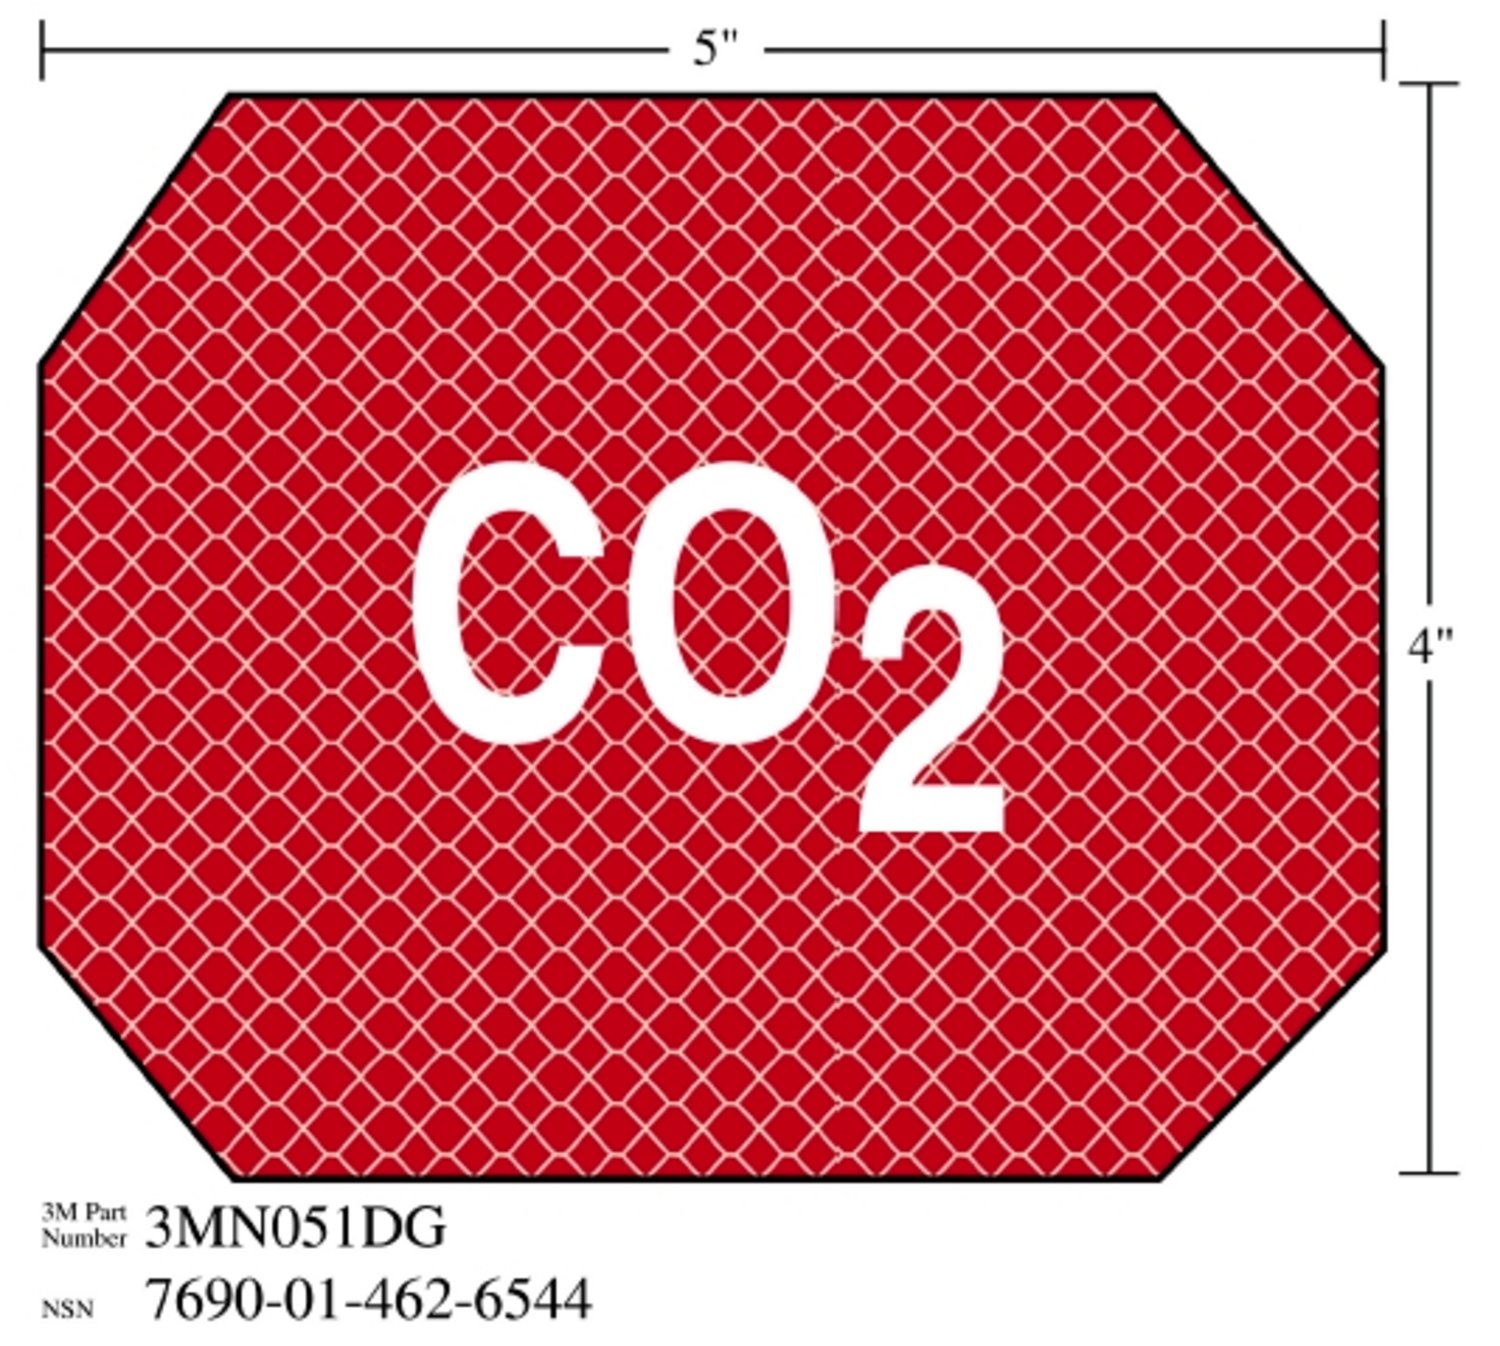 7010343537 - 3M Diamond Grade Damage Control Sign 3MN051DG, "CO2 in, 5 in x 4 in, 10/Package